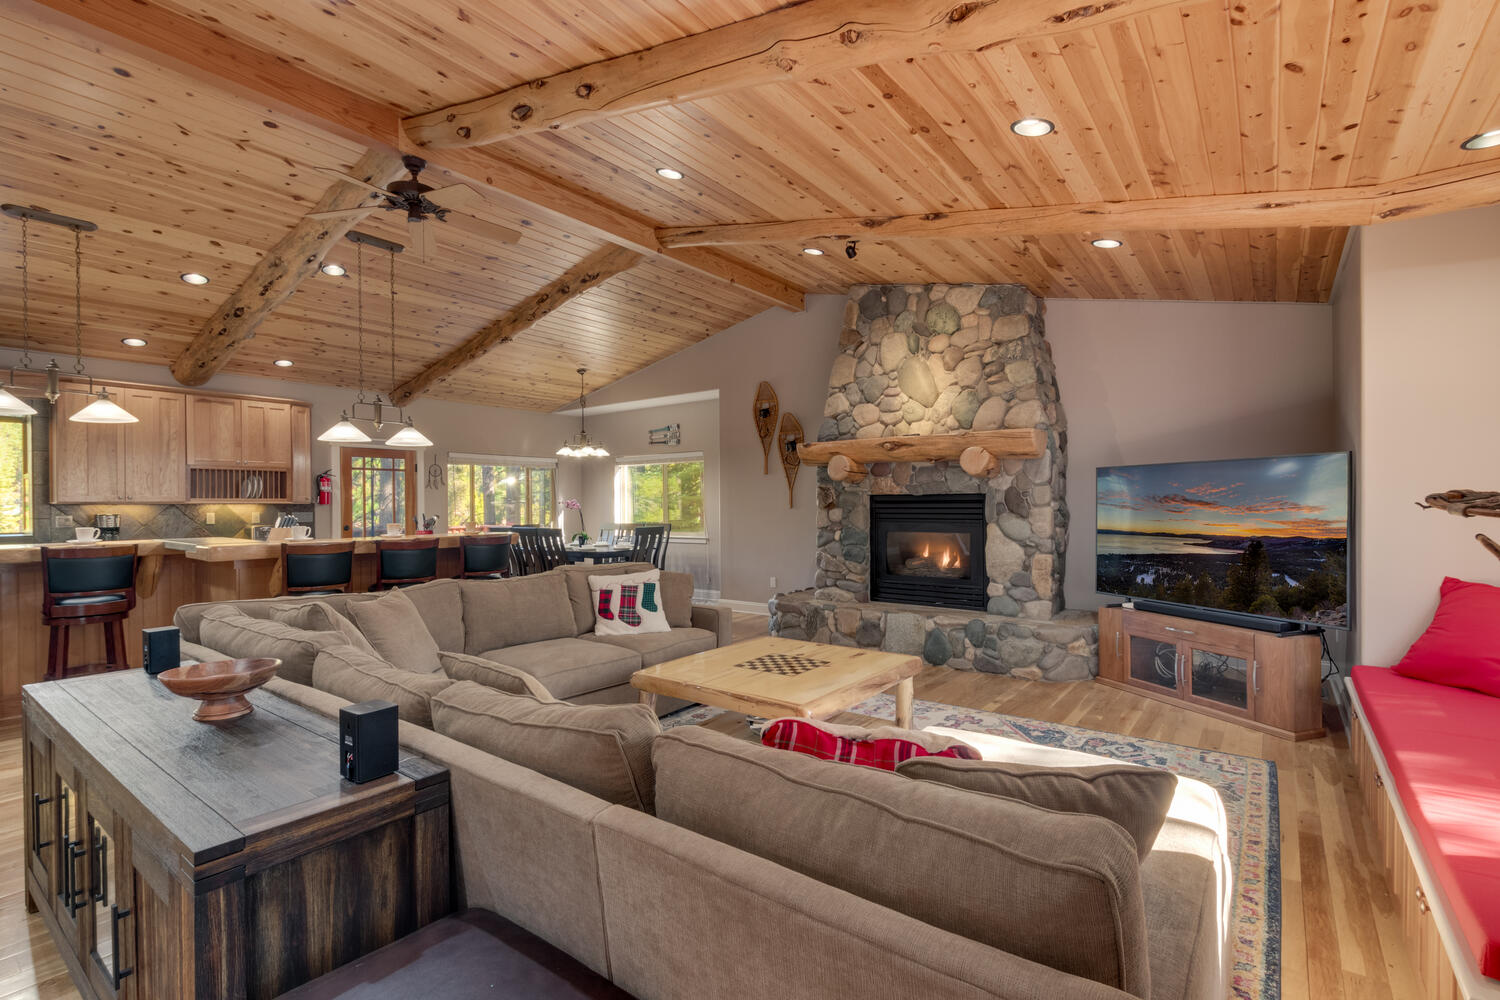 Living area with wood ceiling, flat screen, and fireplace